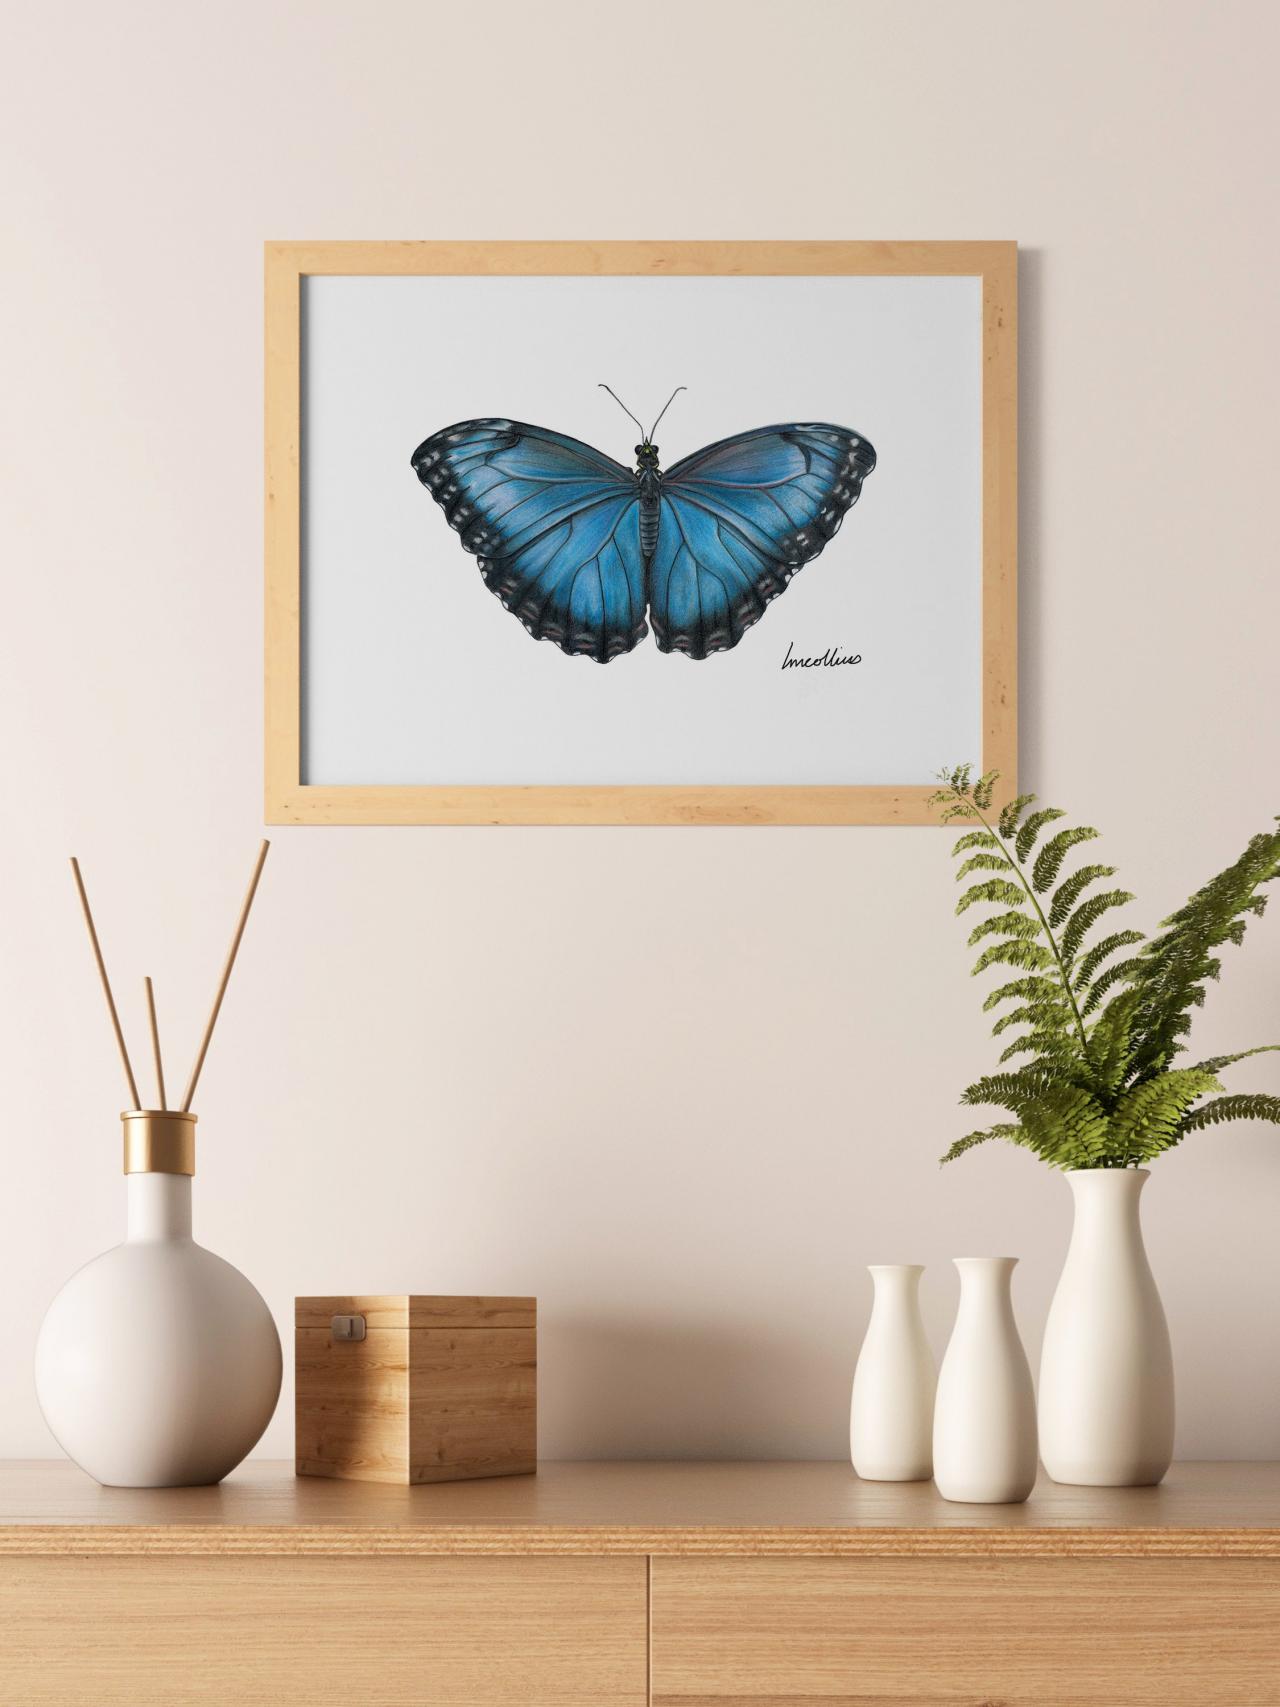 Butterfly Drawing A5 Print, Hand Drawn, Blue Morpho Butterfly, Art Print, Home Decor, Gift For Her, Housewarming Gift, Made In Australia